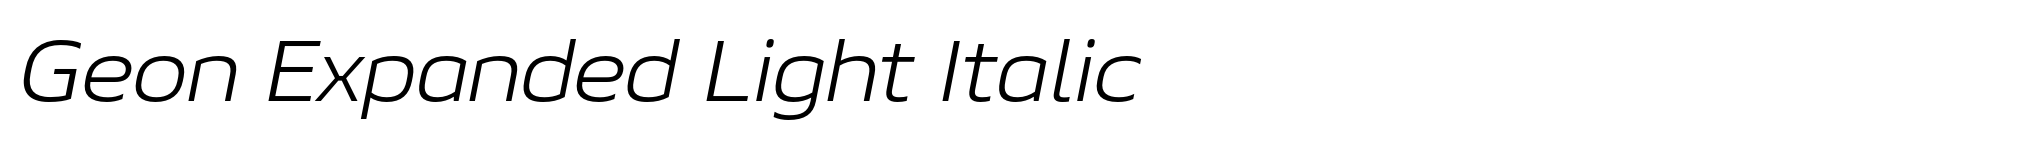 Geon Expanded Light Italic image